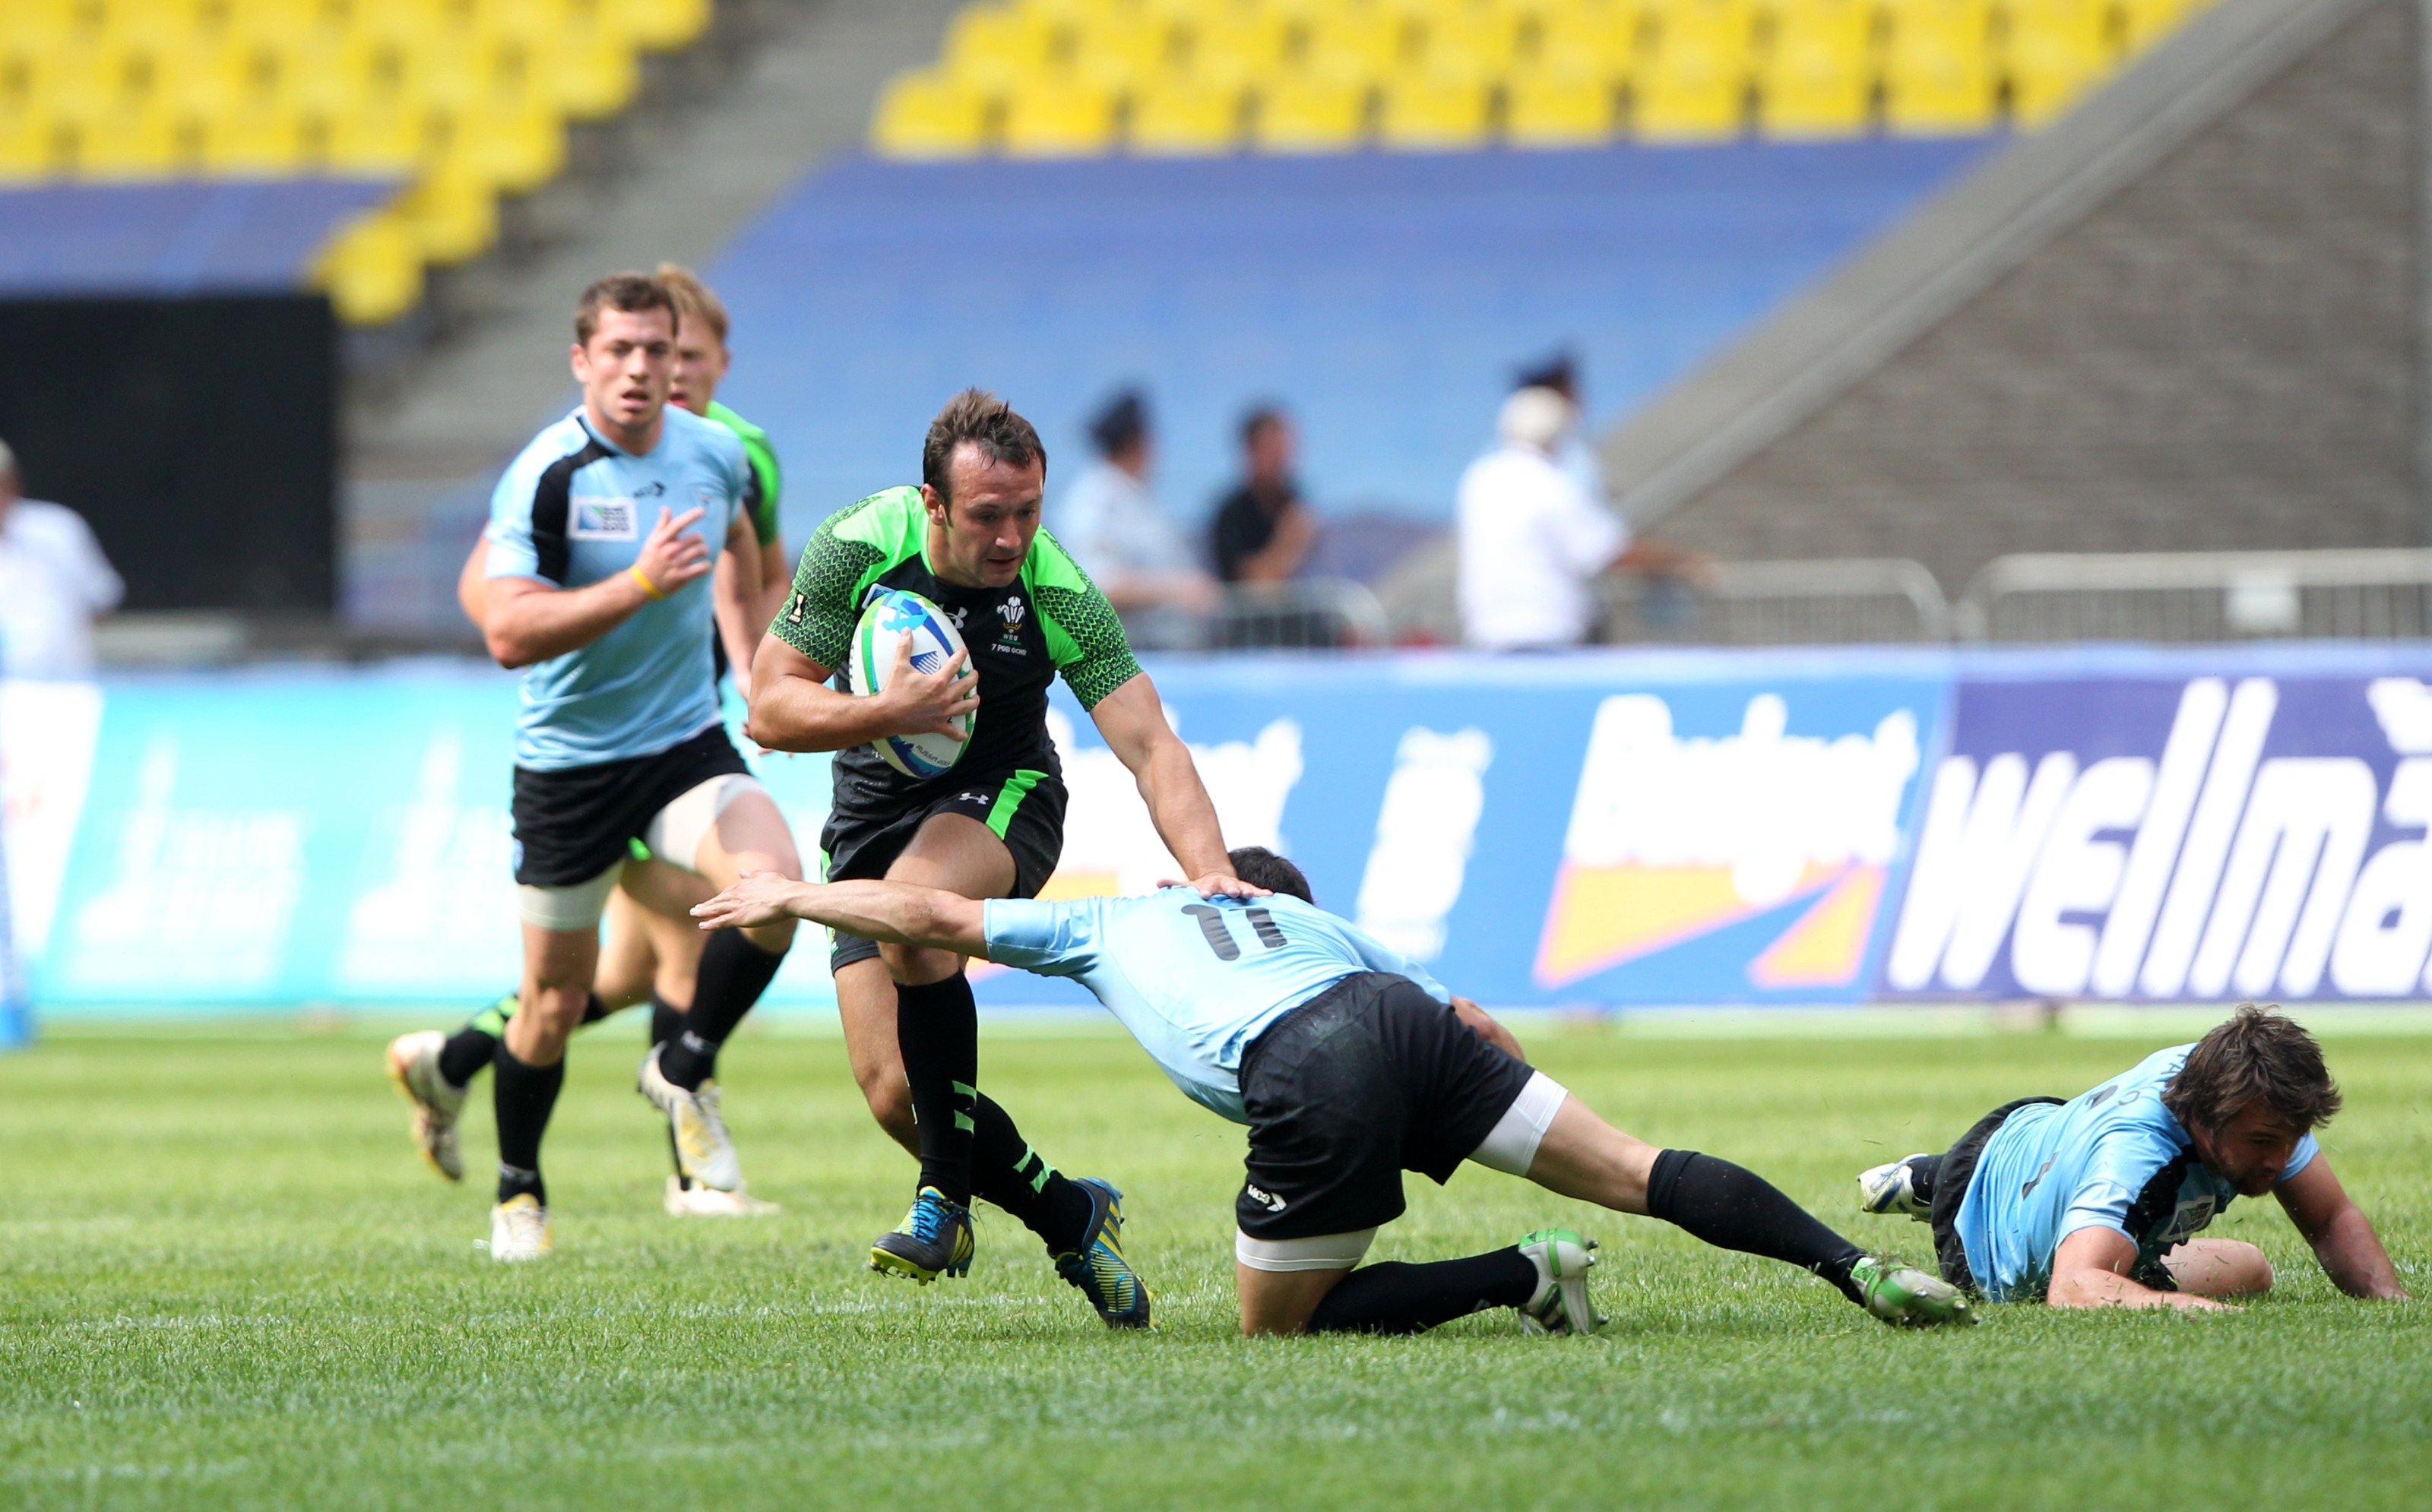 Rugby World Cup Sevens - Moscow 2013